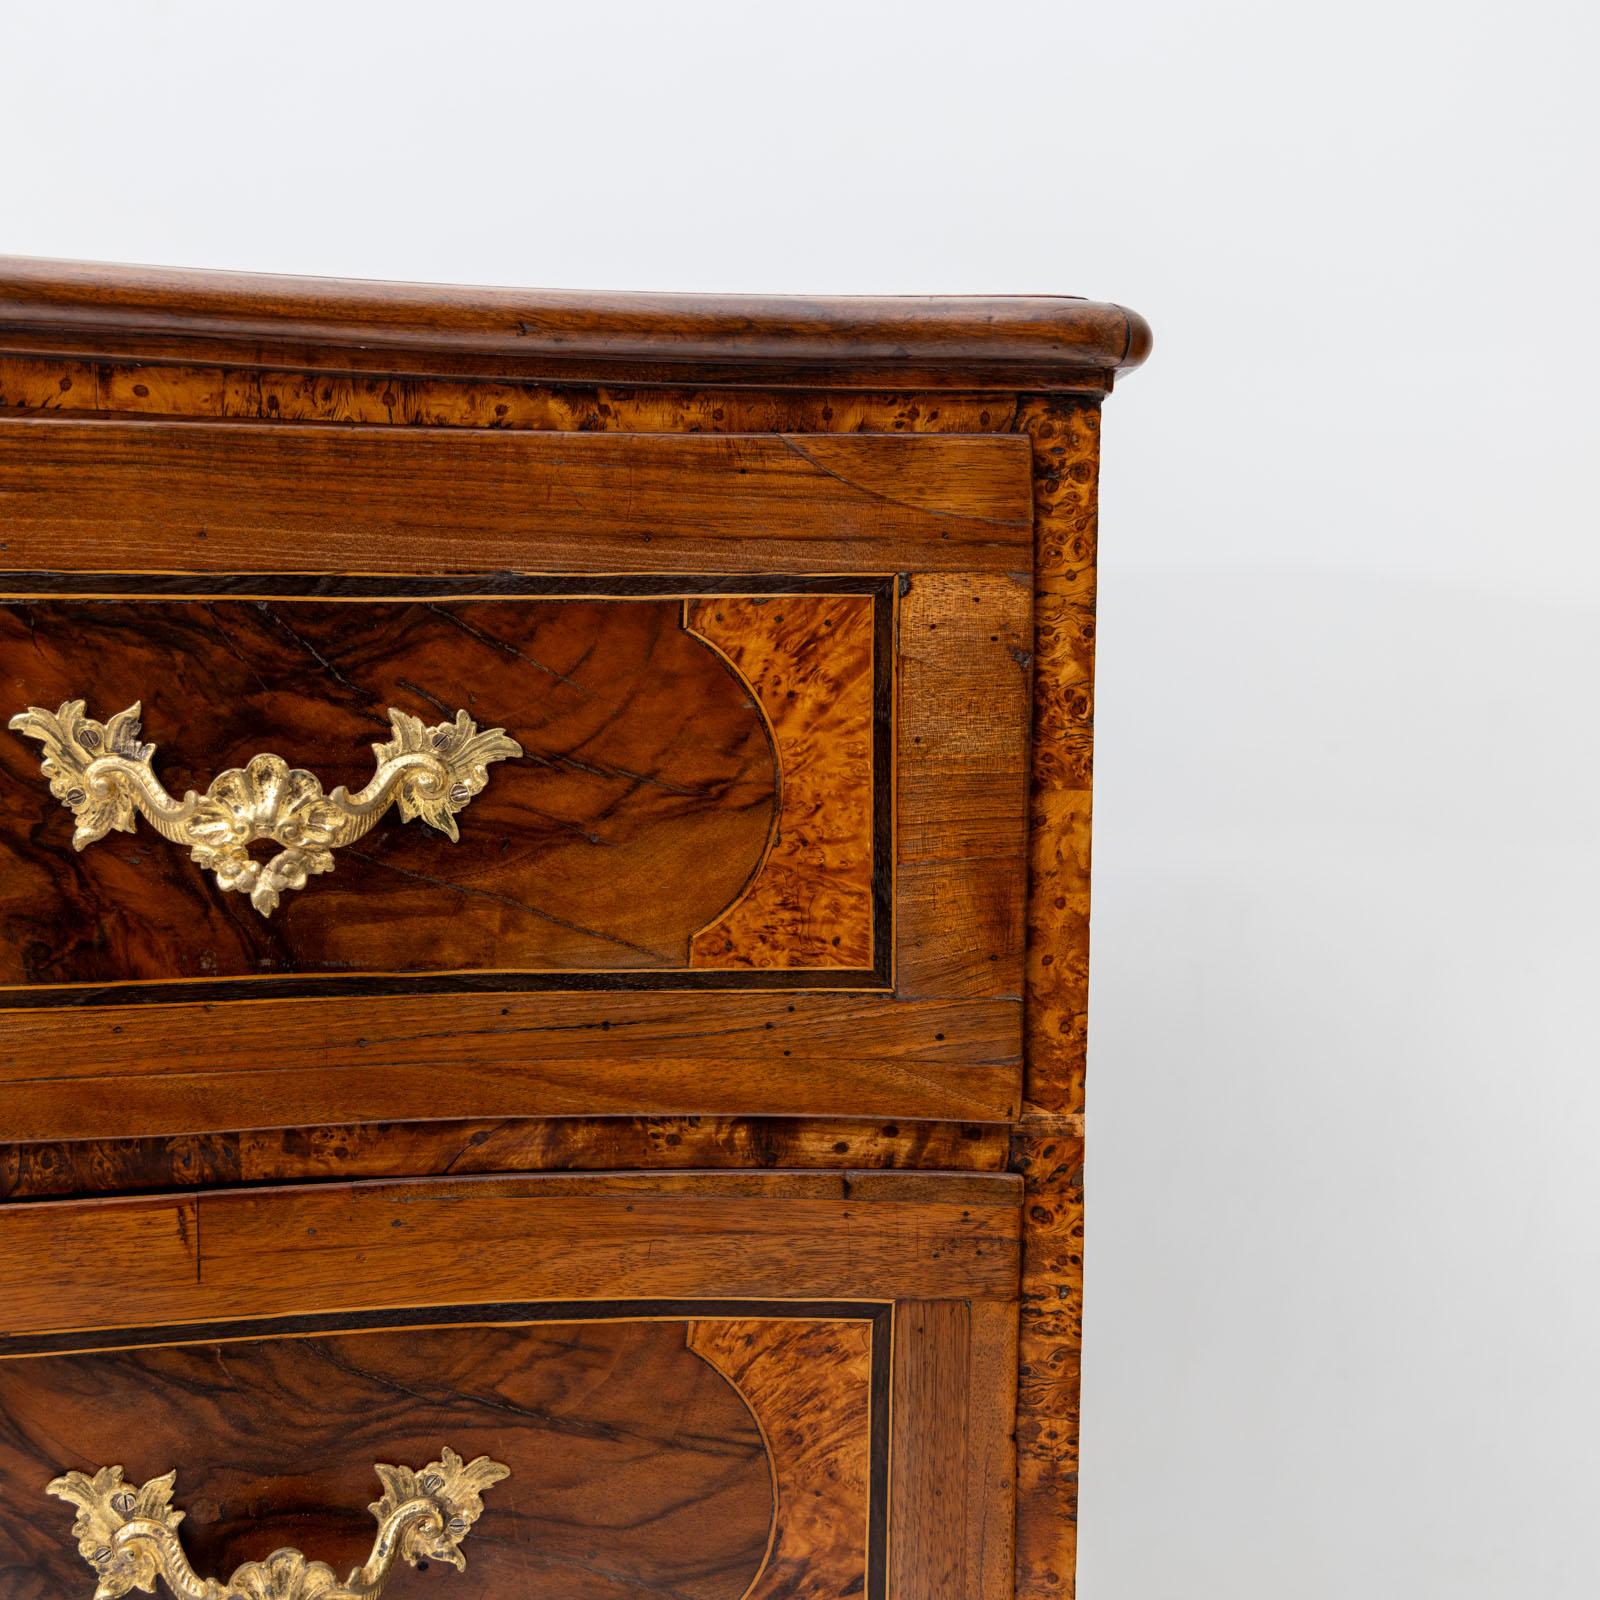 Baroque Chest of Drawers in Walnut, Inlaywork and Bronze fittings, Mid-18th C. For Sale 3